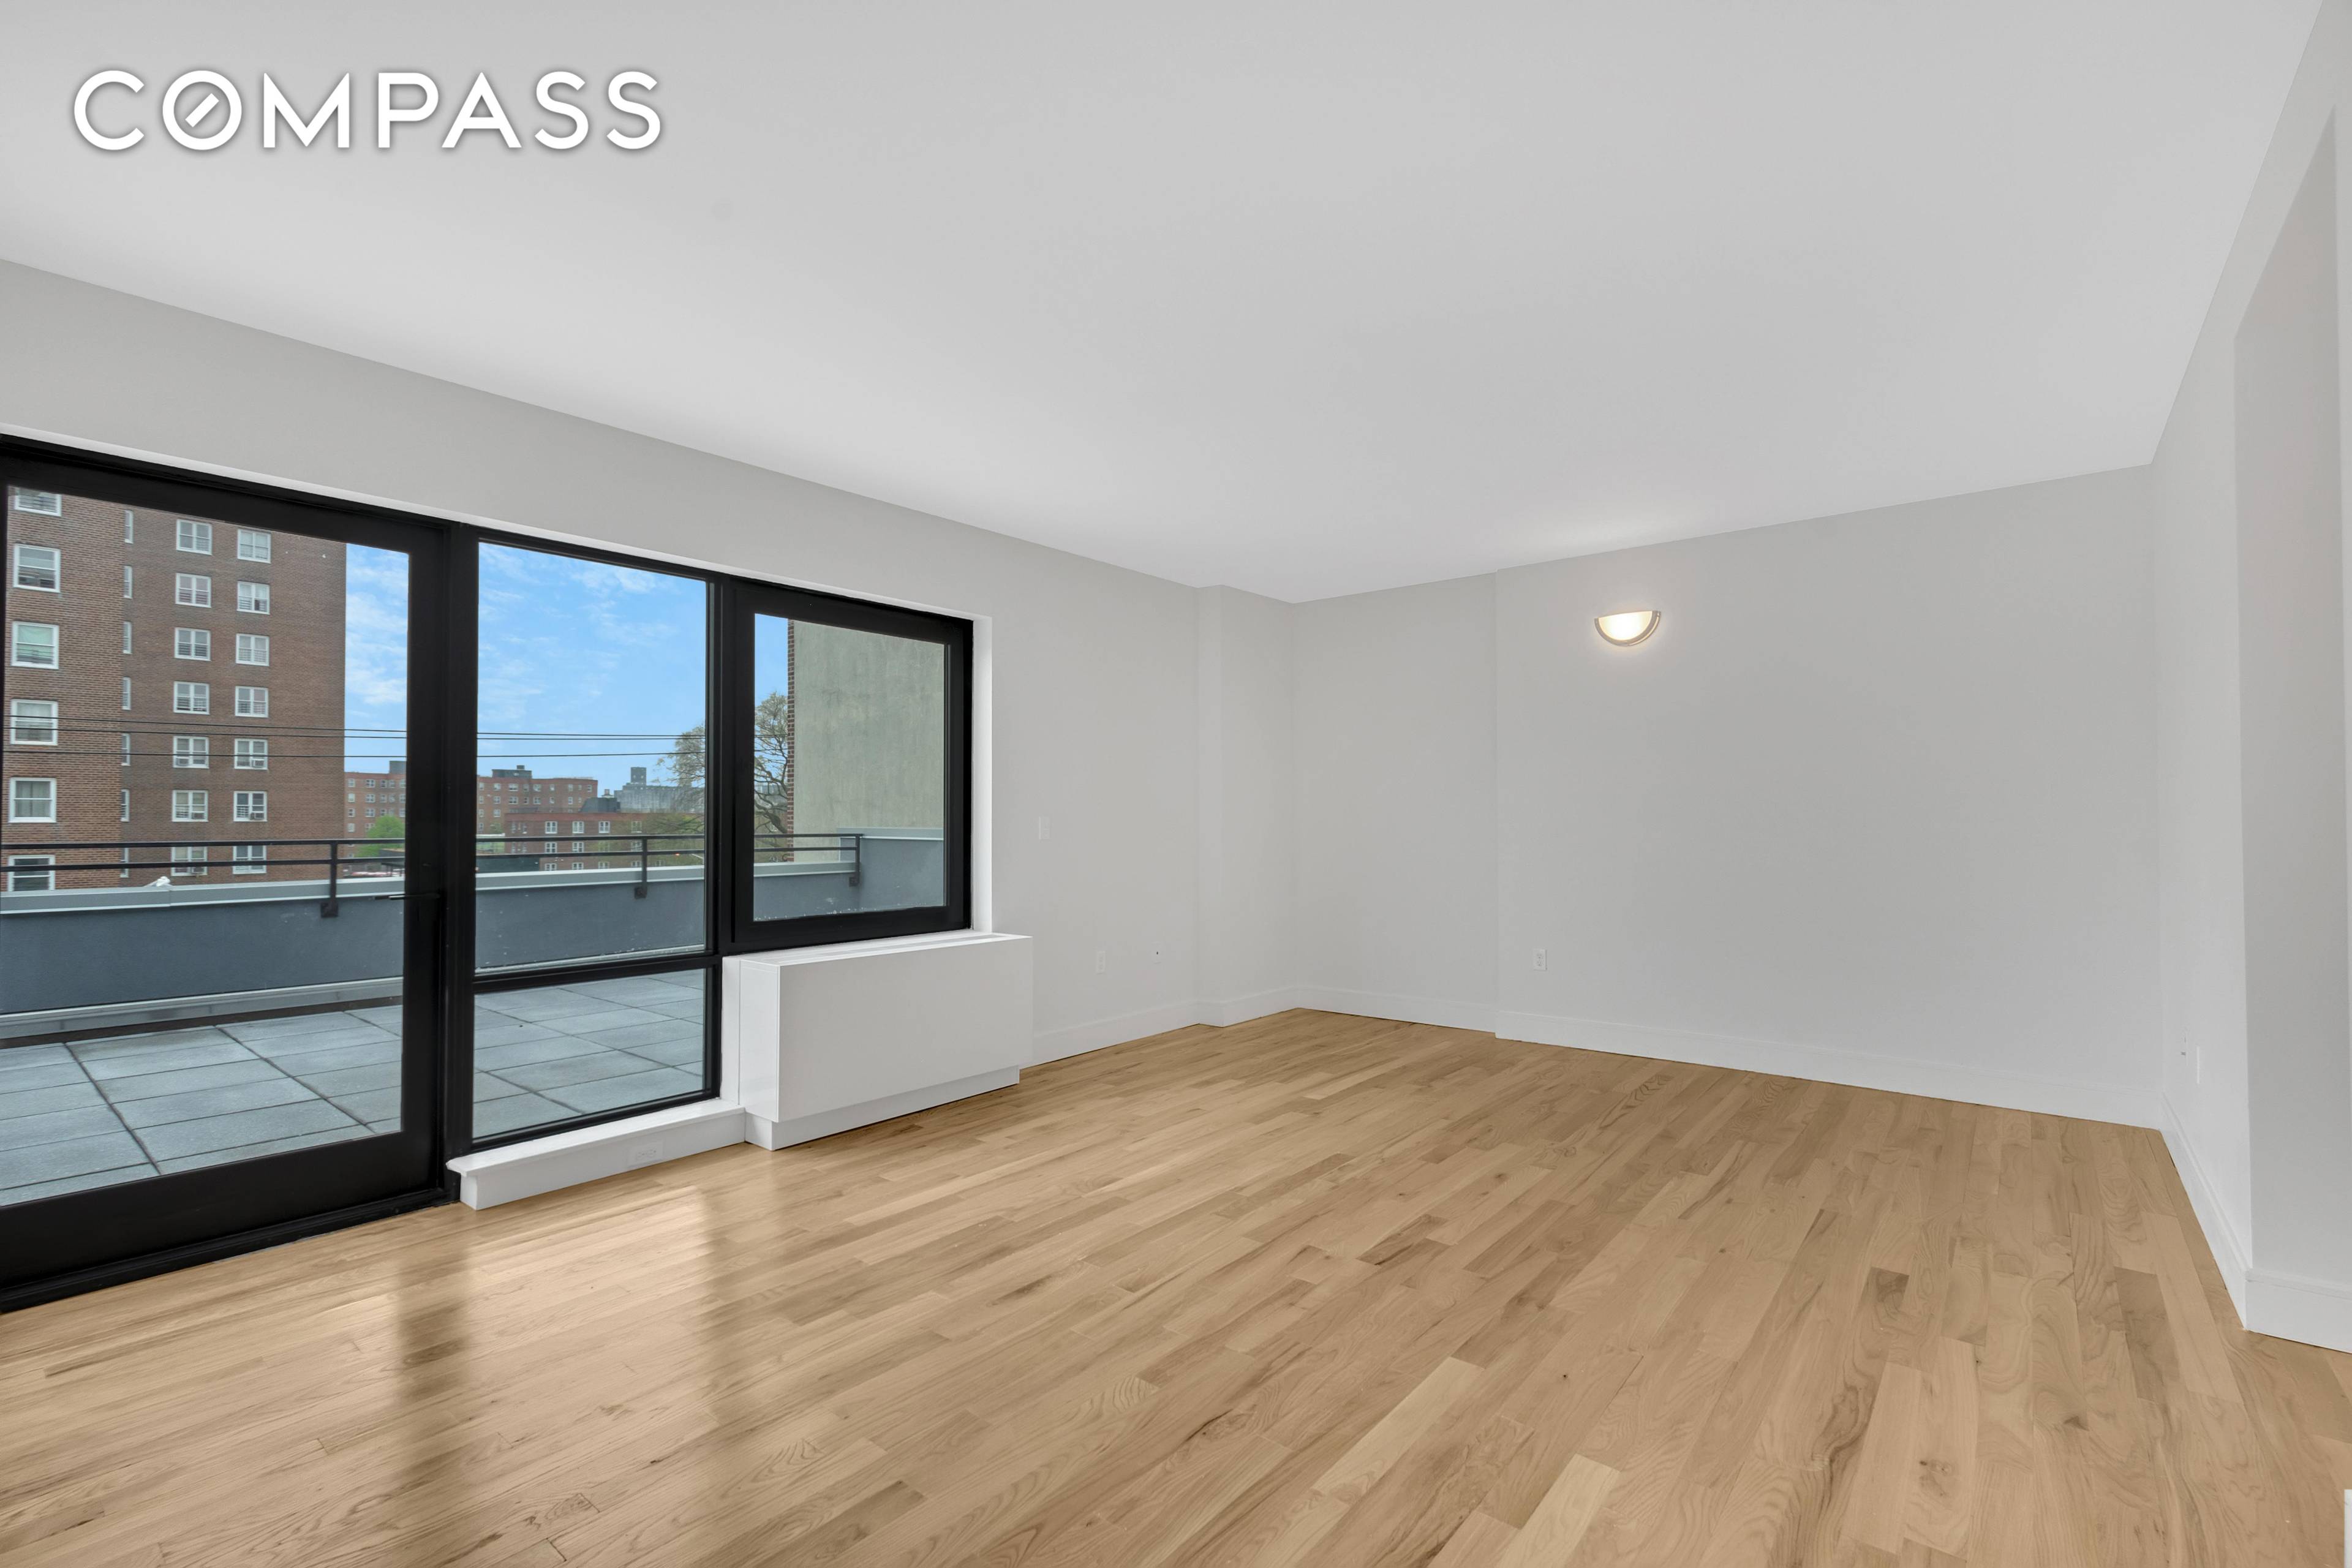 Welcome to 142 Richards St, a contemporary new rental building located in Red Hook.